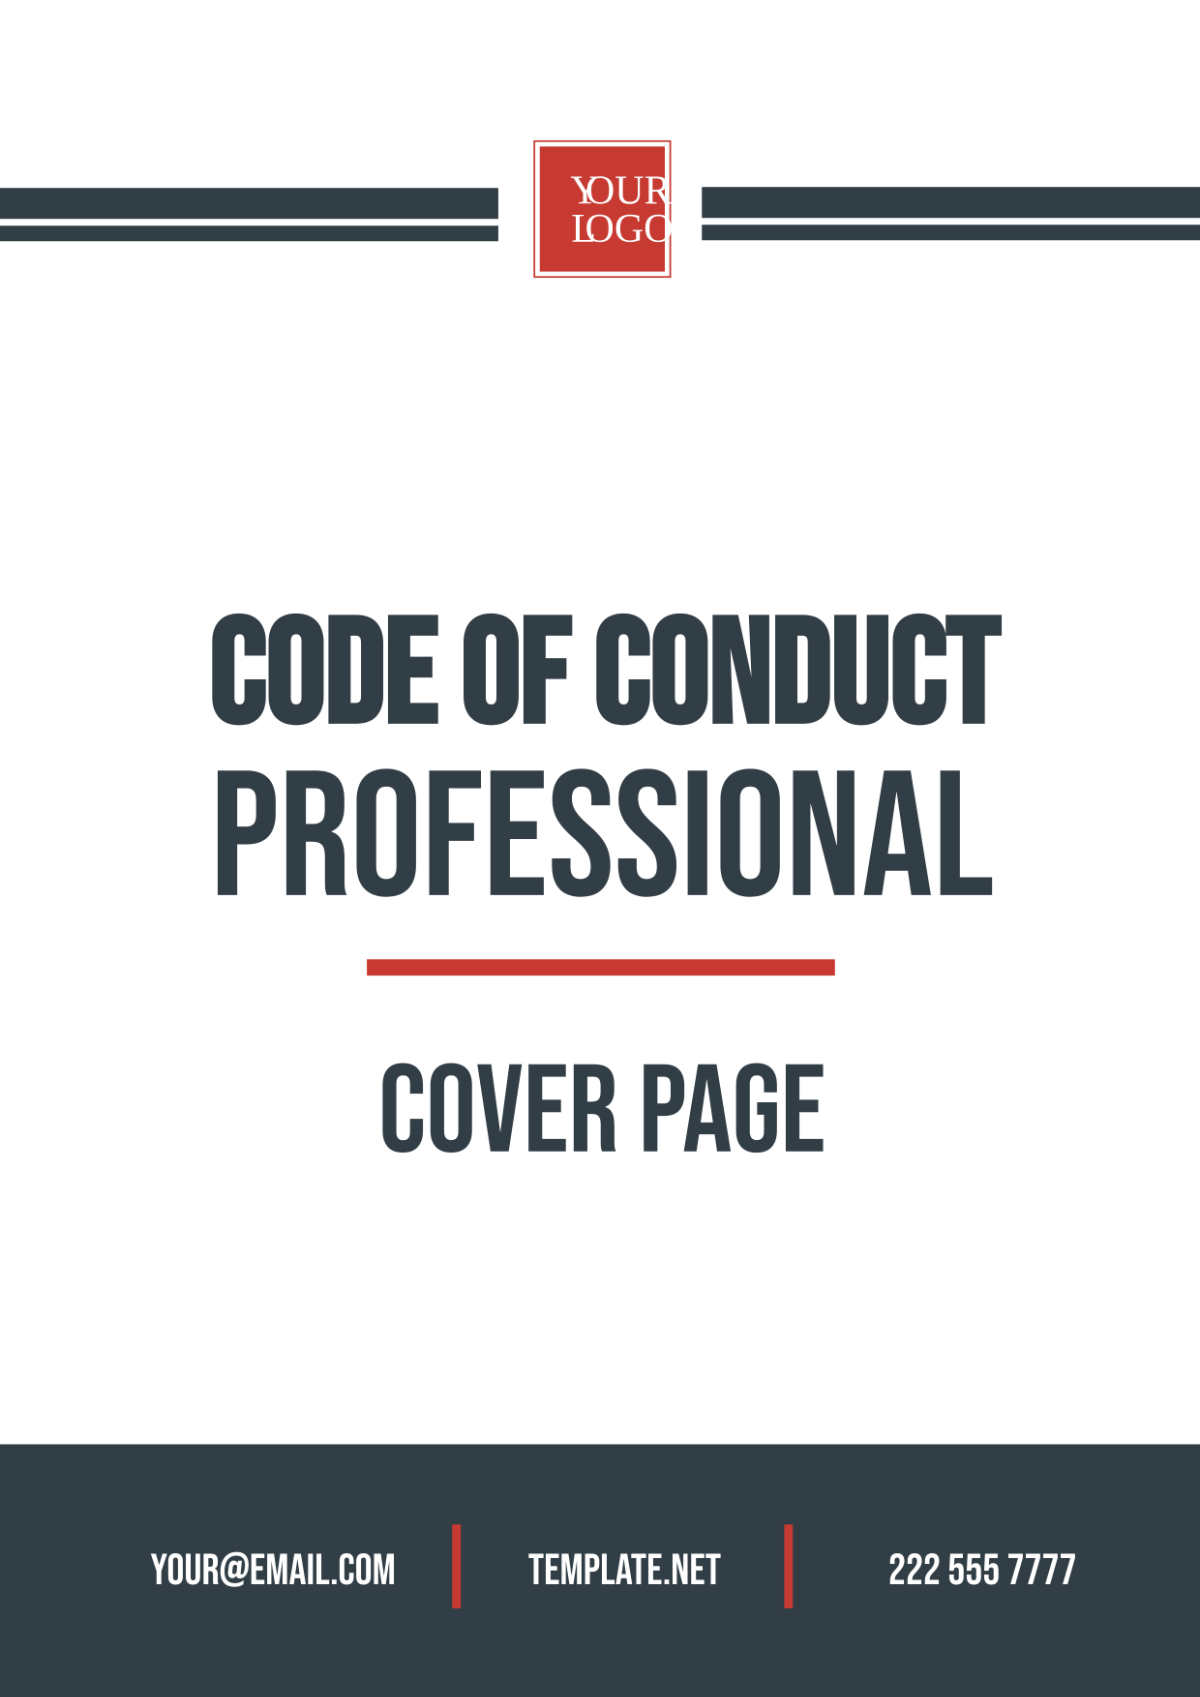 Code of Conduct Professional Cover Page Template